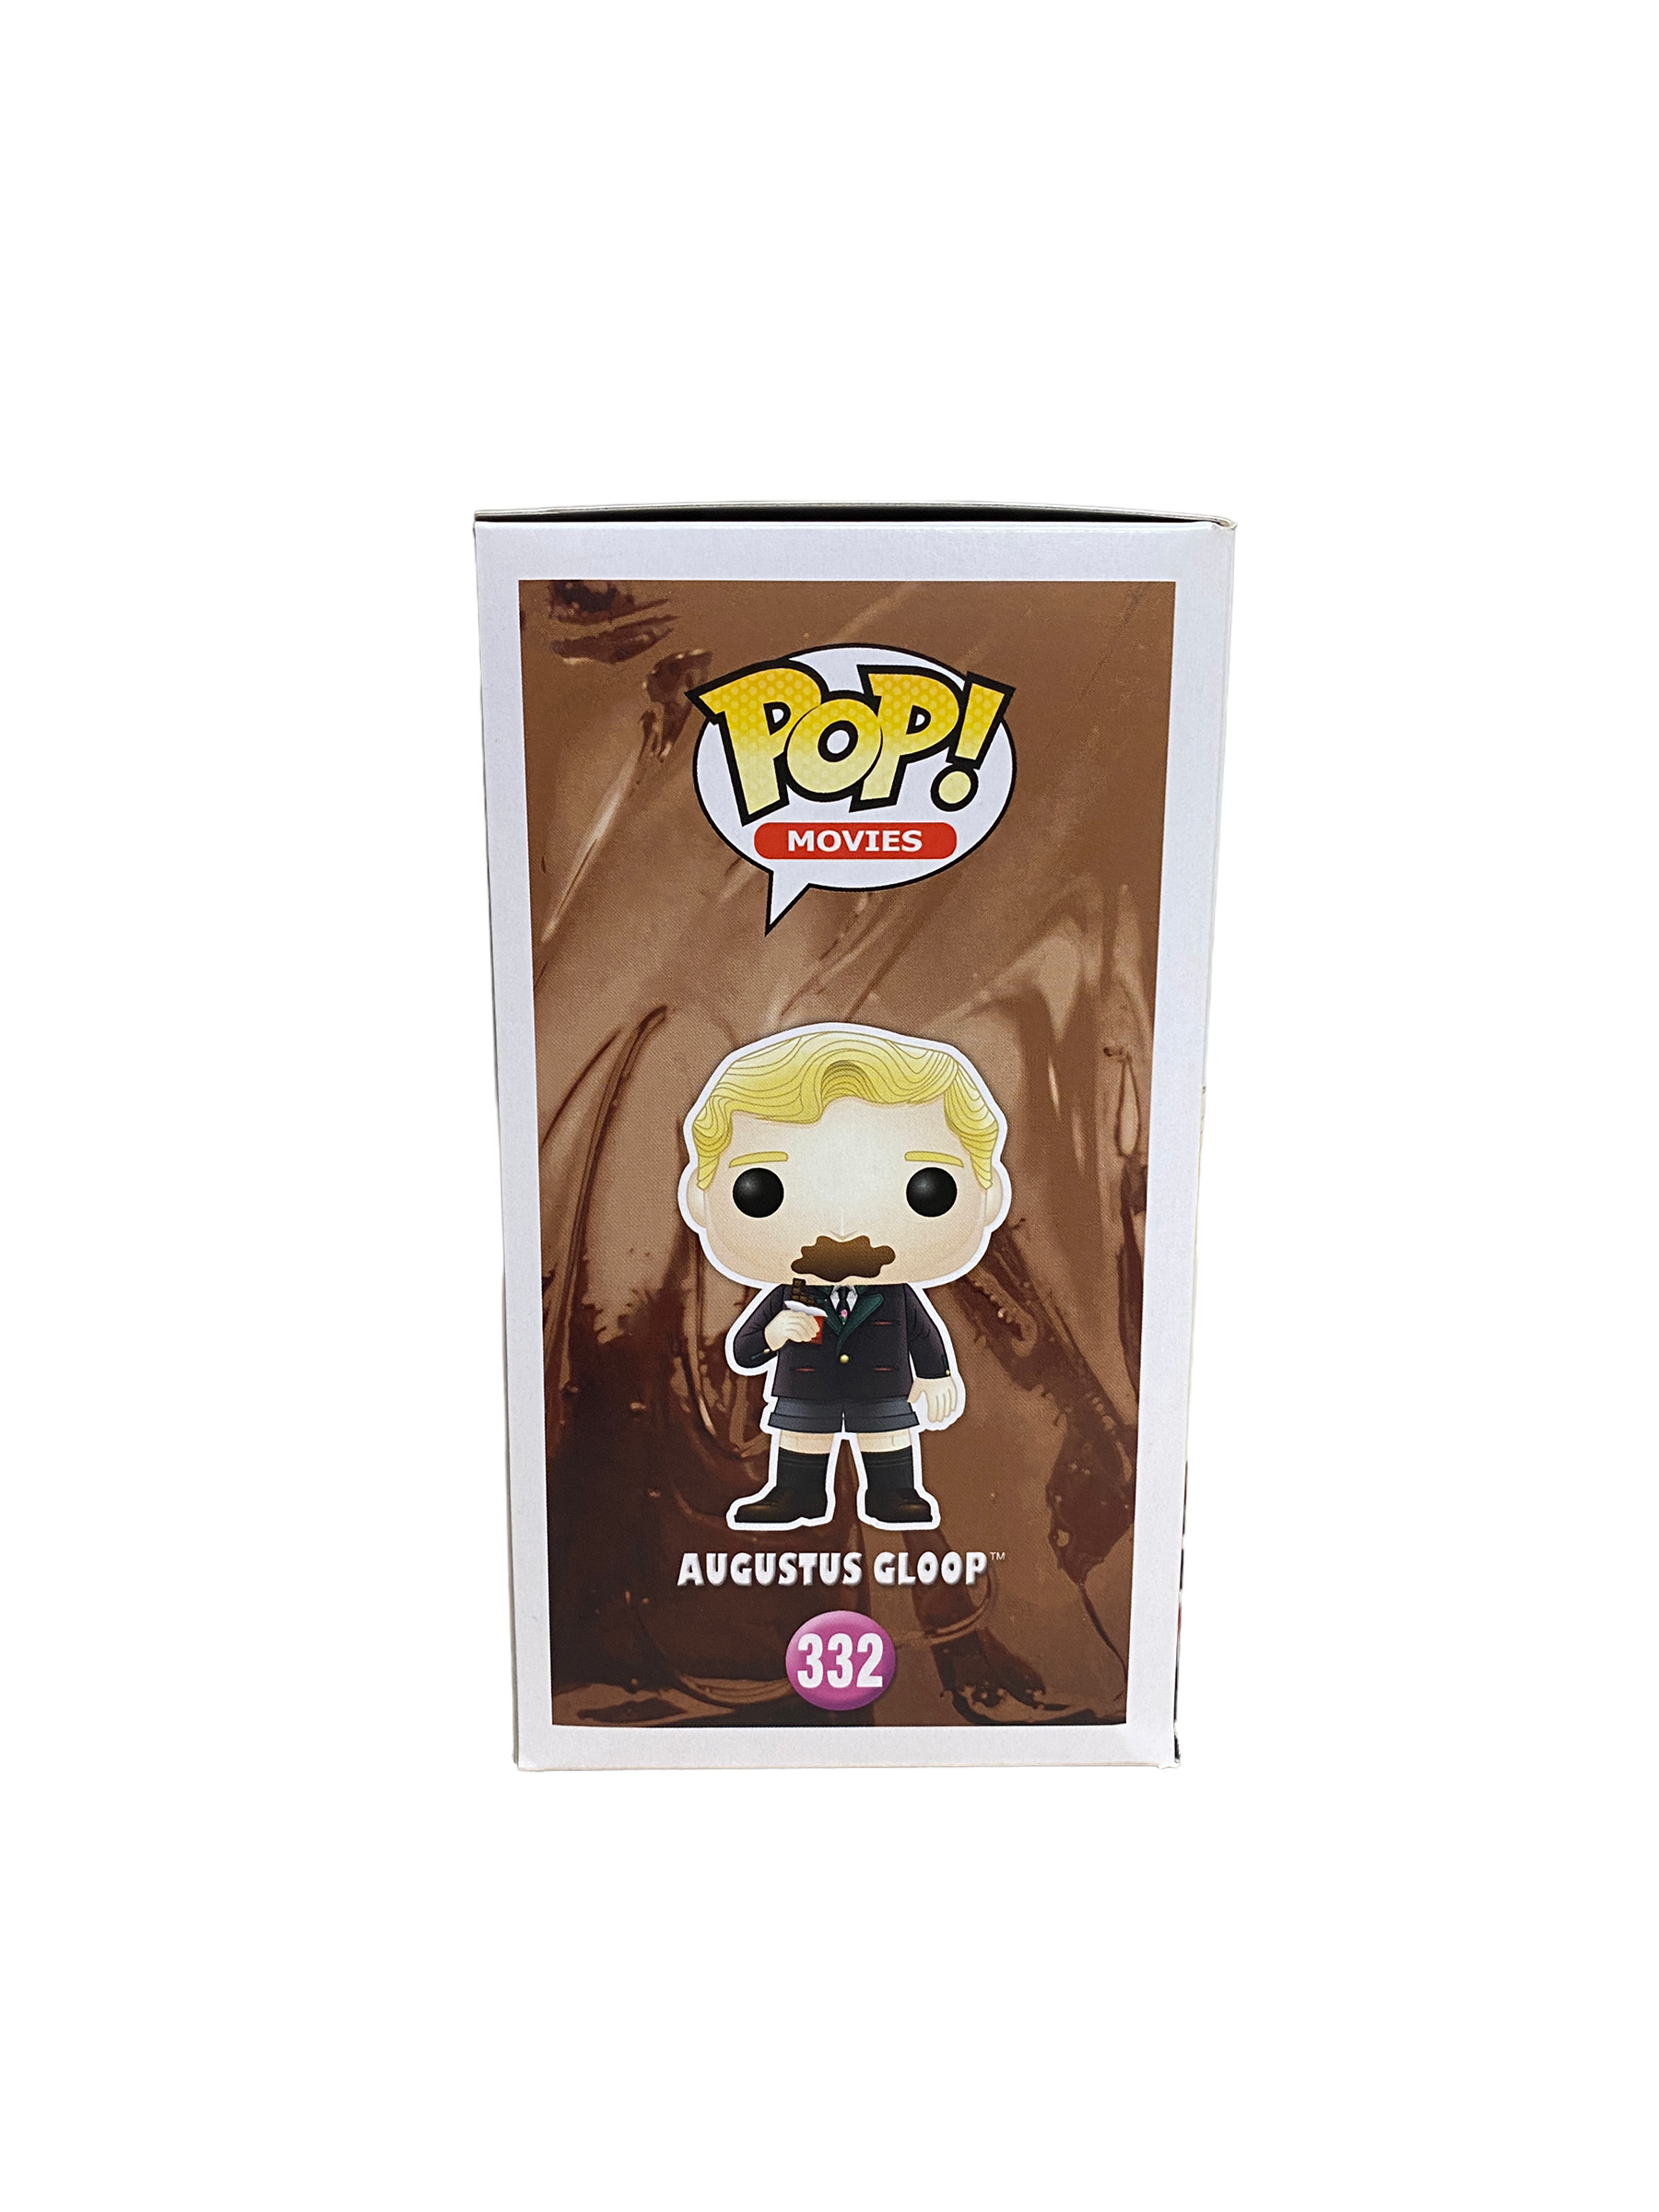 Augustus Gloop #332 Funko Pop! - Willy Wonka & The Chocolate Factory - 2016 Pop! - Condition 7.5/10